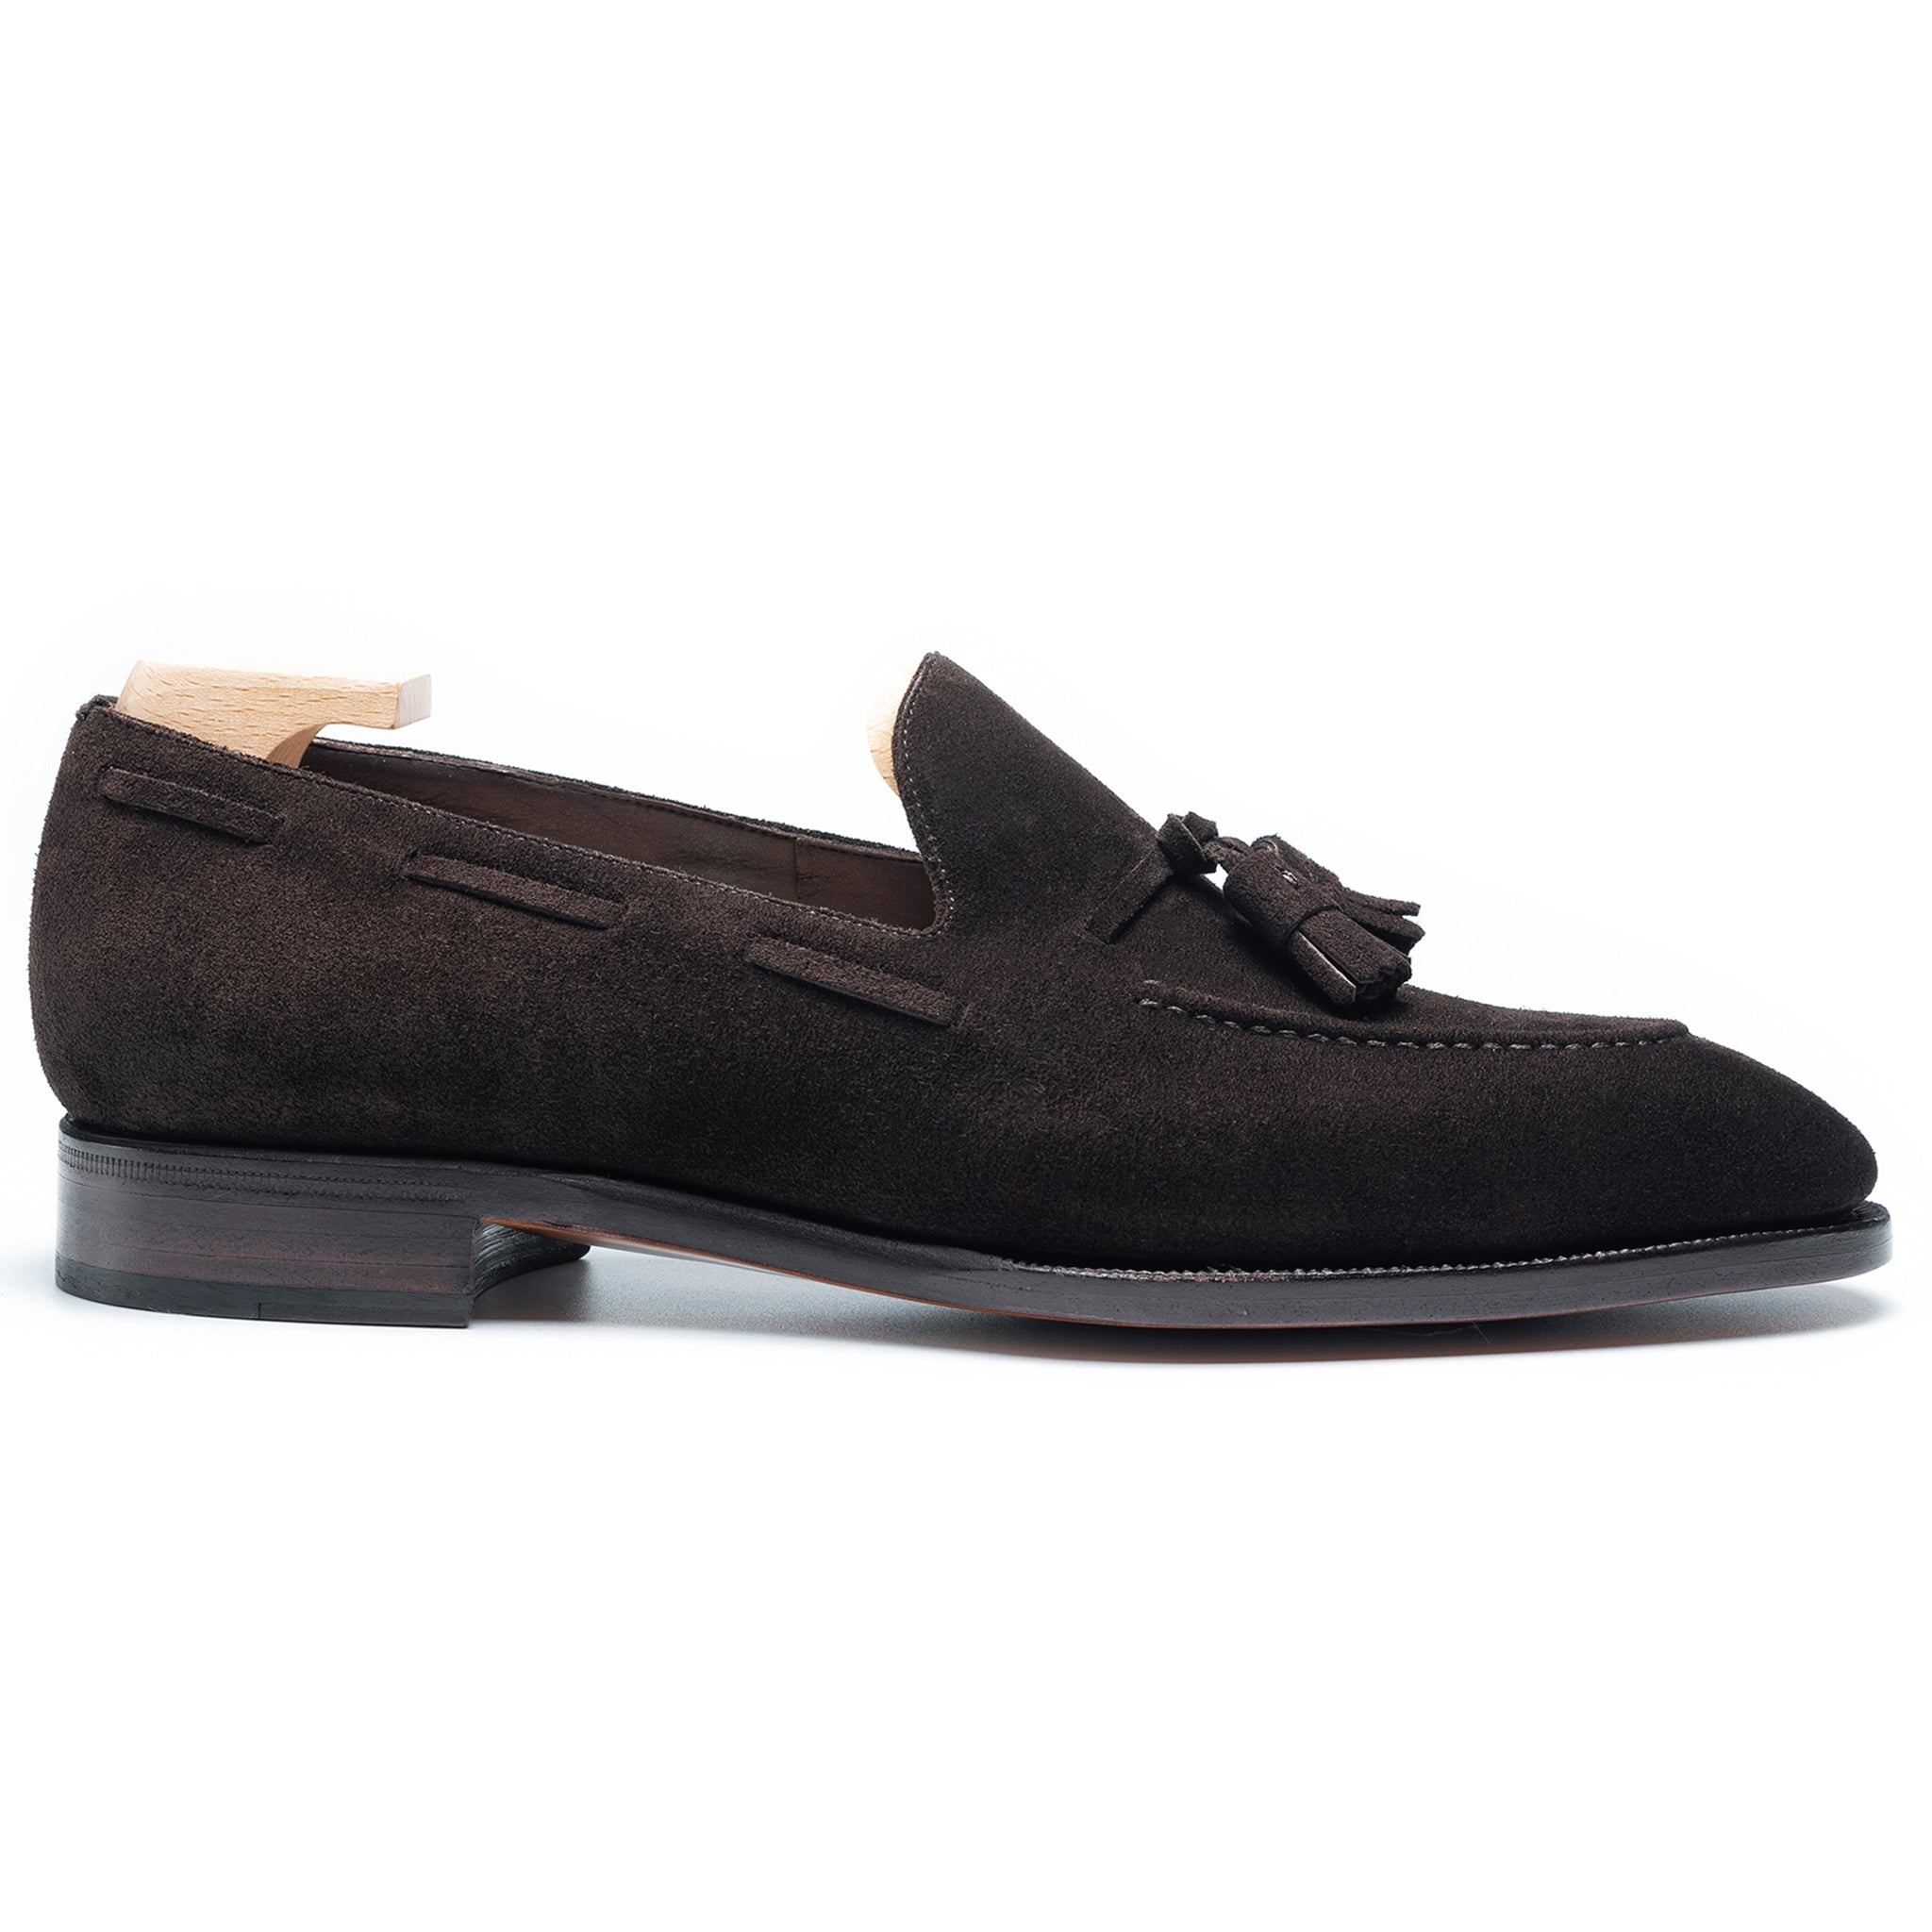 TLB Mallorca | Men's Leather loafers | Men's leather shoes | Goya